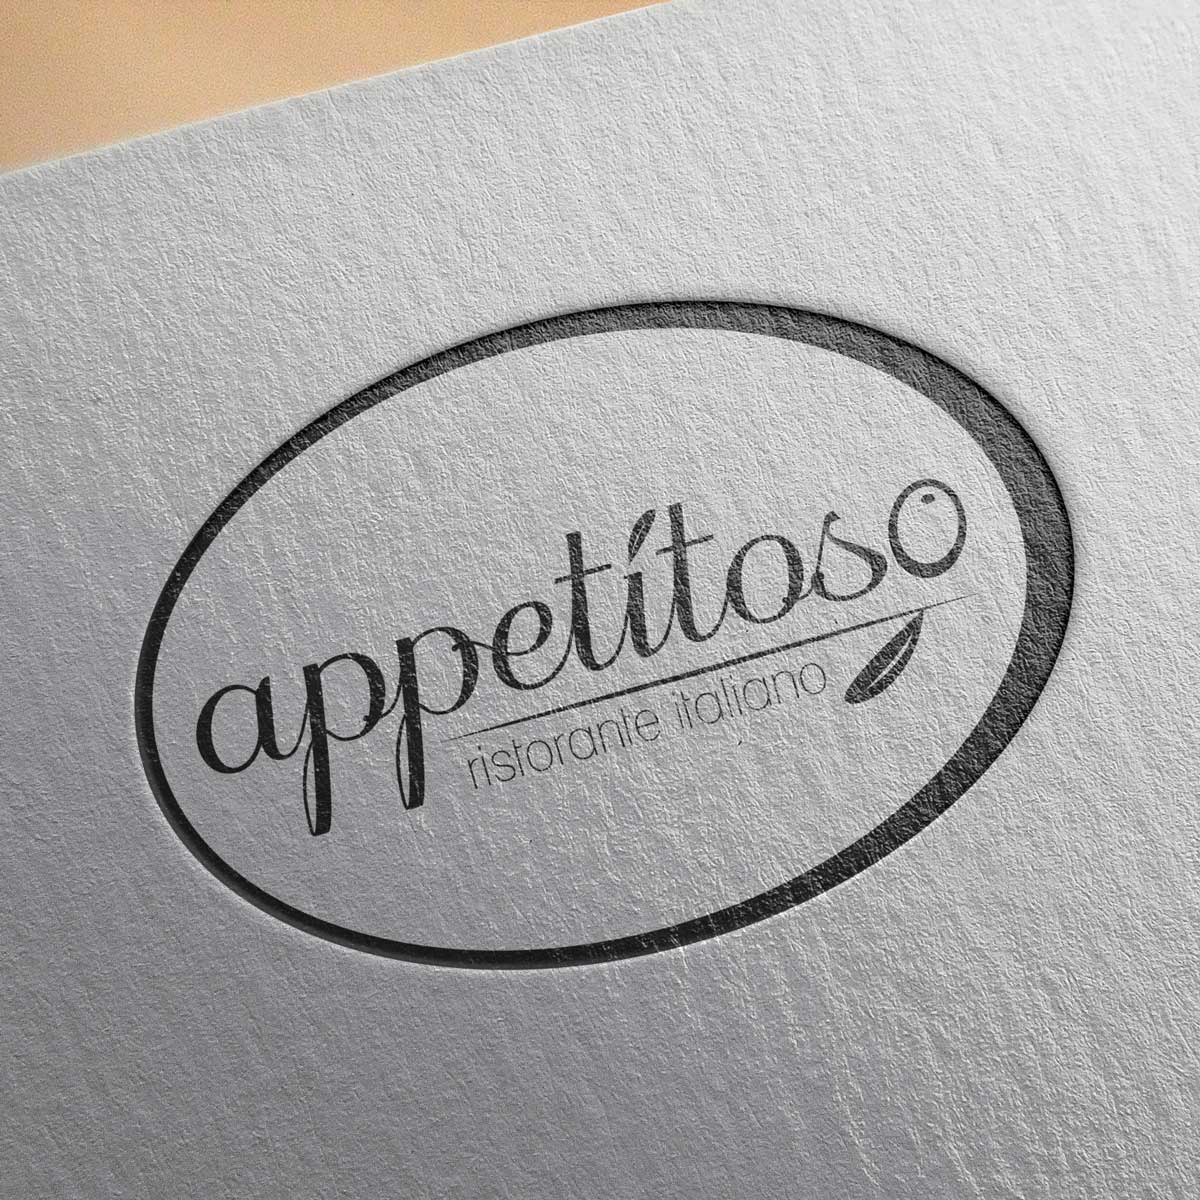 This is a logo for Appetitoso Restaurant